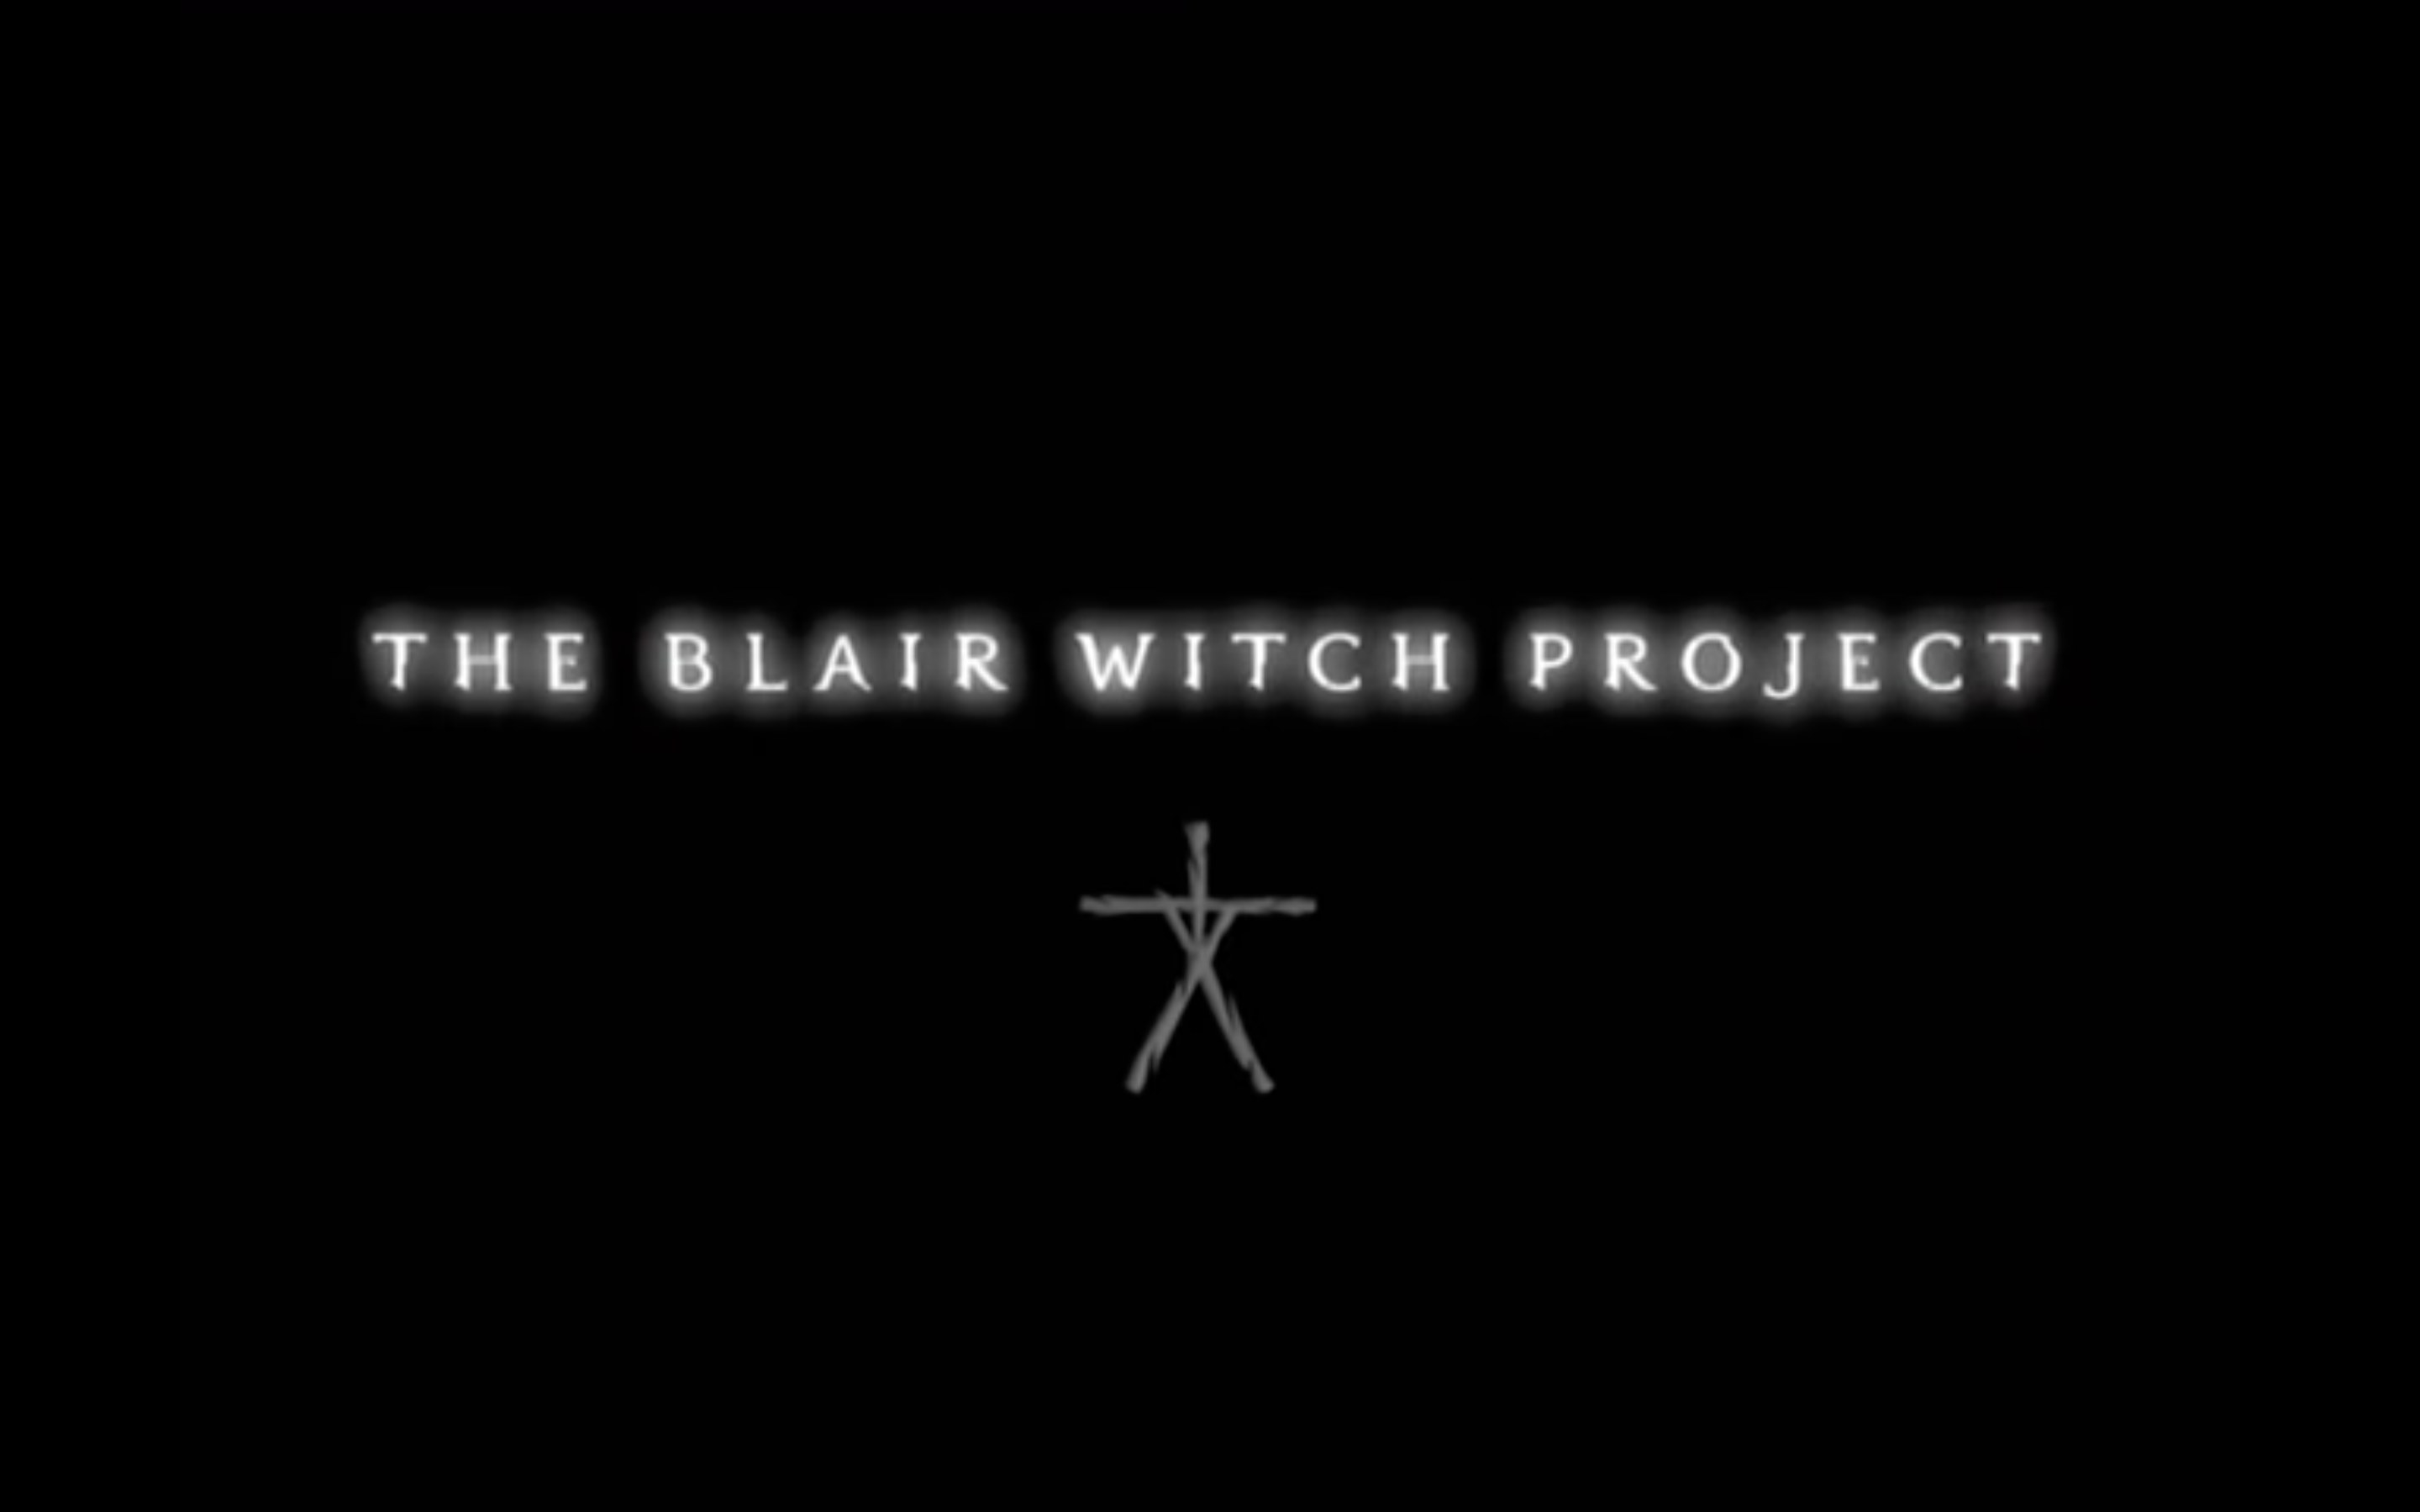 &quot;The Blair Witch Project&quot; text